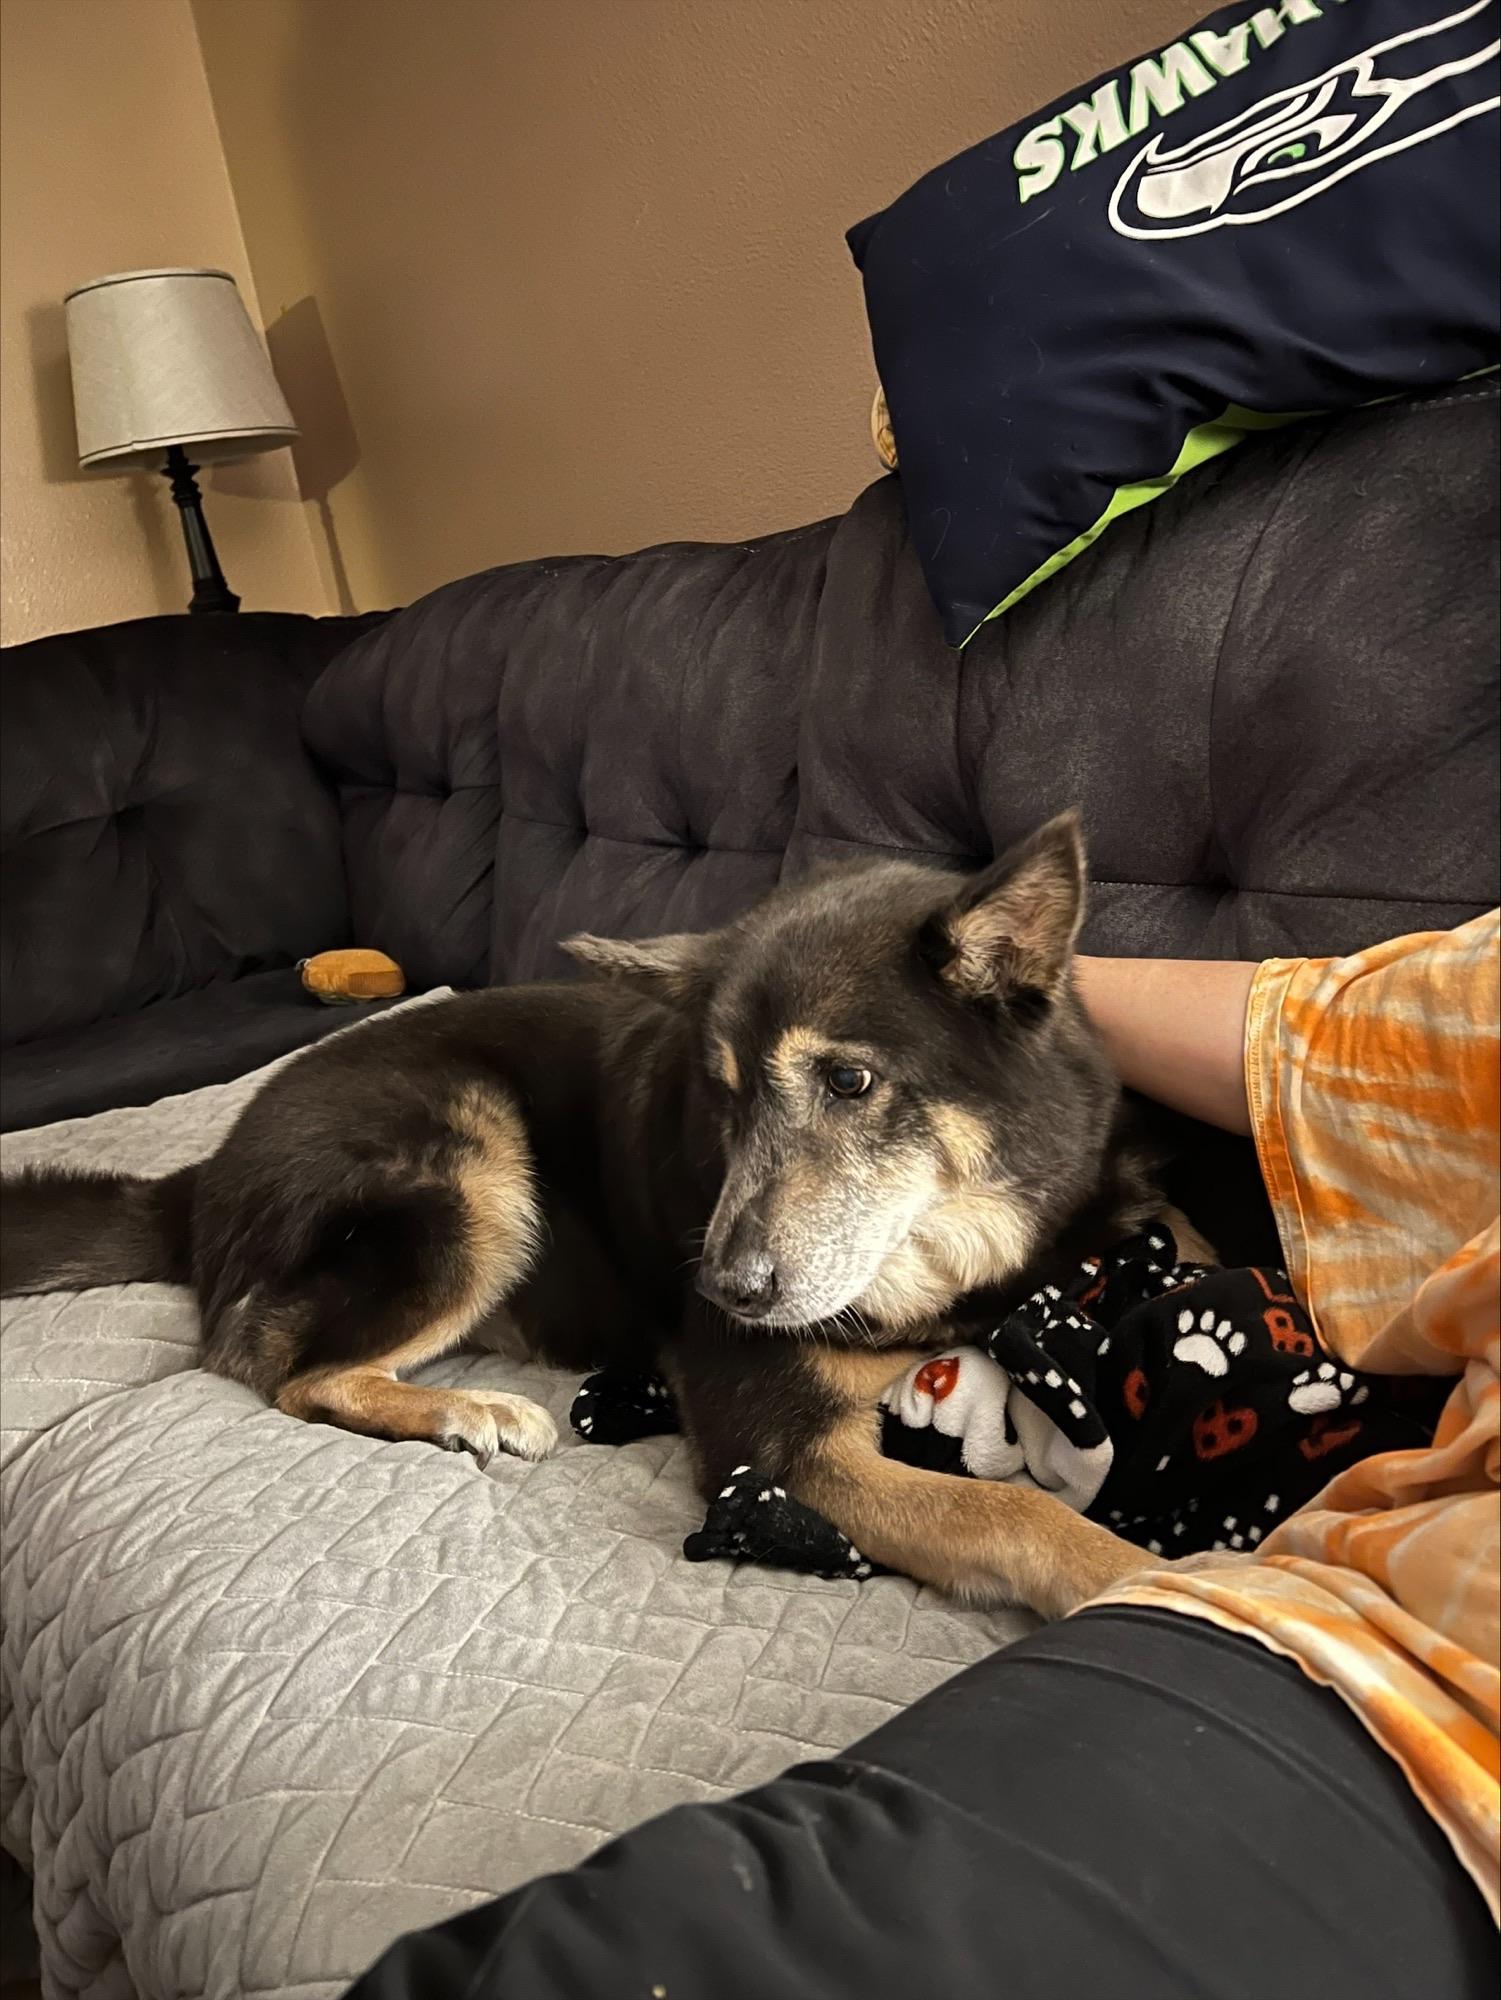 A black and brown dog lays on a couch. A human's arm is draped around him in an embrace.